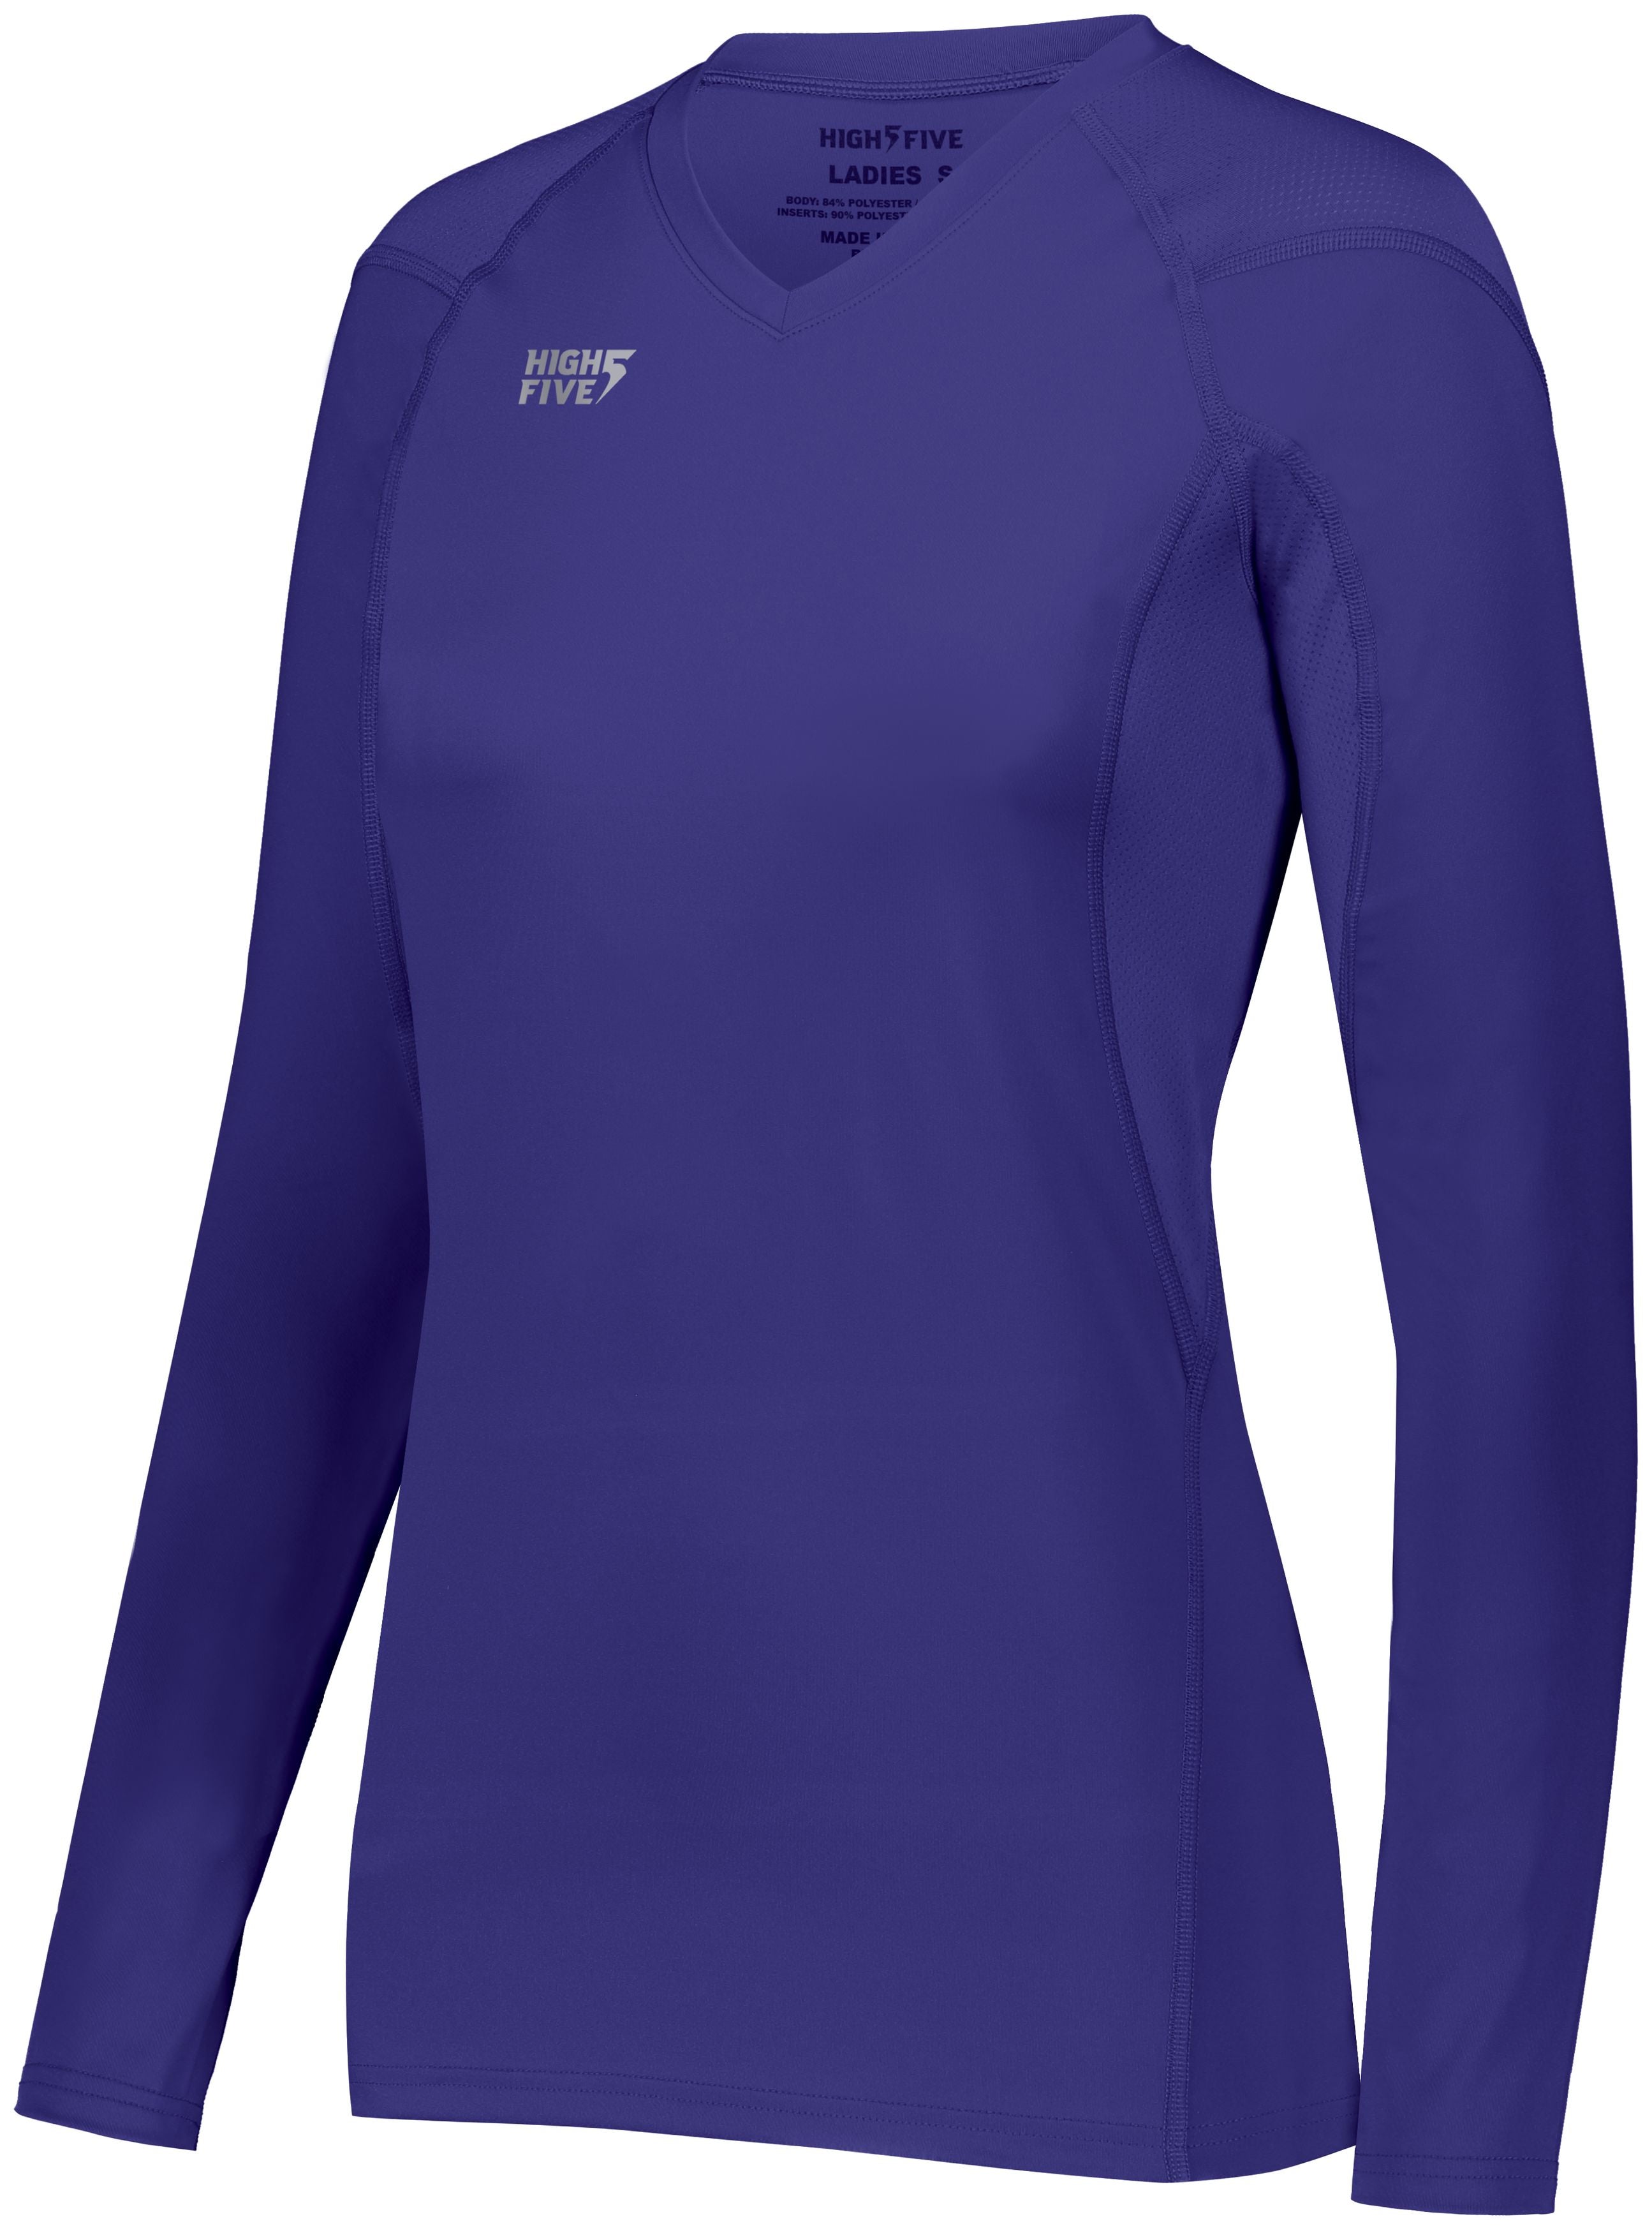 High 5 Ladies Truhit Long Sleeve Jersey in Purple (Hlw)  -Part of the Ladies, Ladies-Jersey, High5-Products, Volleyball, Shirts product lines at KanaleyCreations.com